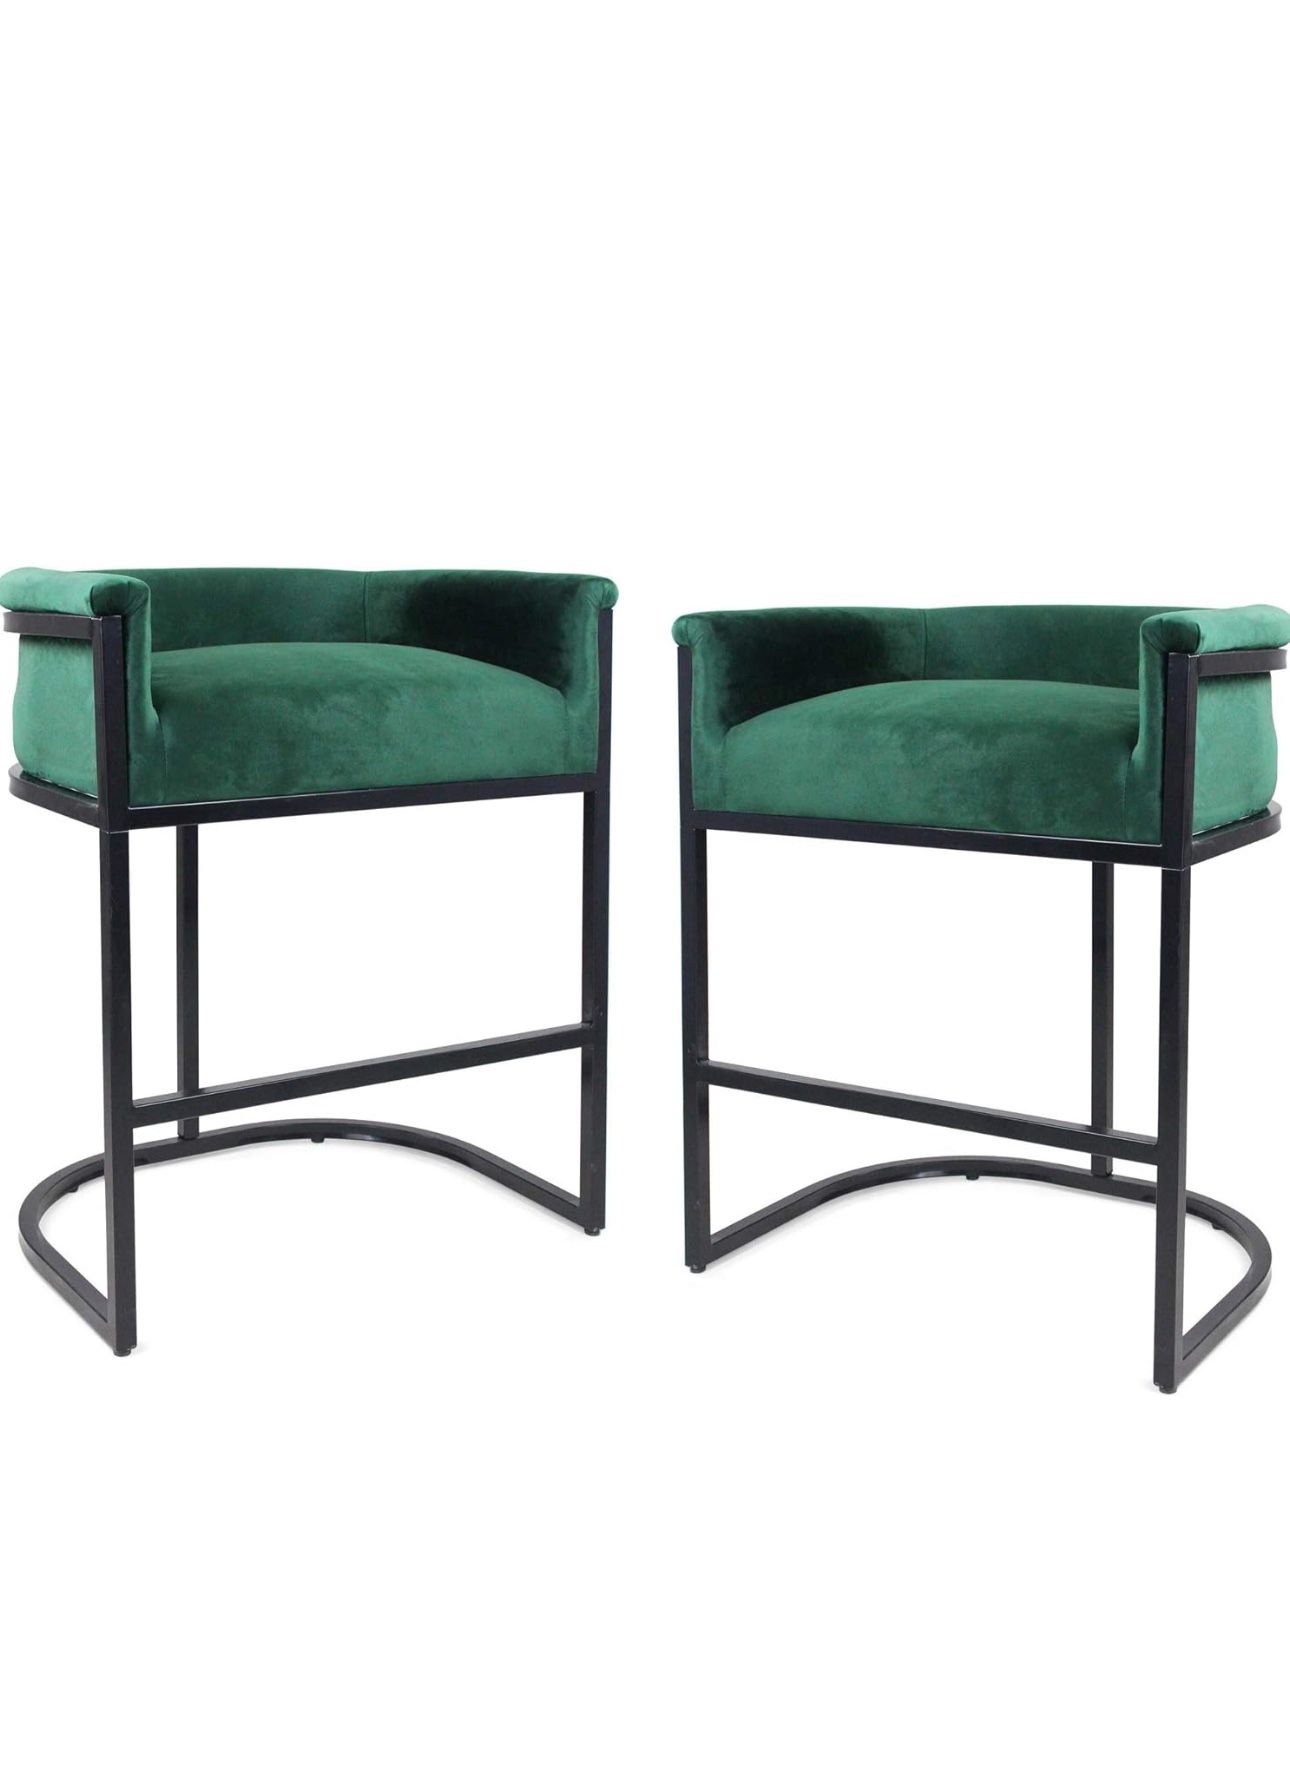 2 Chair Set Counter Stool Chairs 